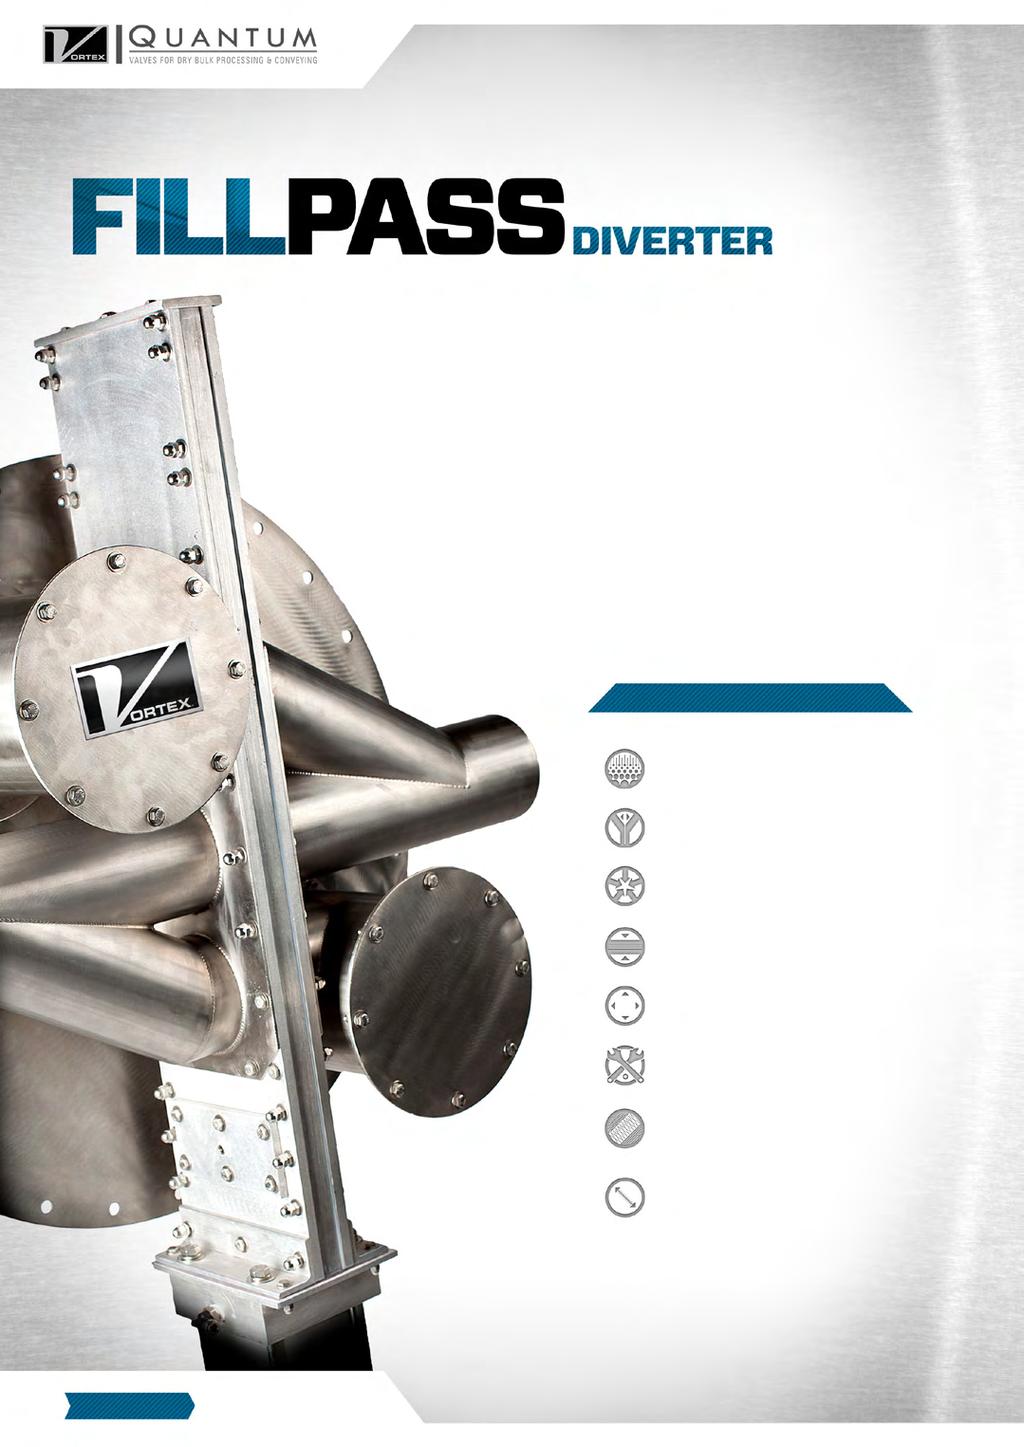 The Vortex Fill Pass Diverter is specifically engineered to handle dry bulk solids in vacuum or dilute phase pneumatic conveying systems with pressure up to 15 psig (1 barg) depending on size.